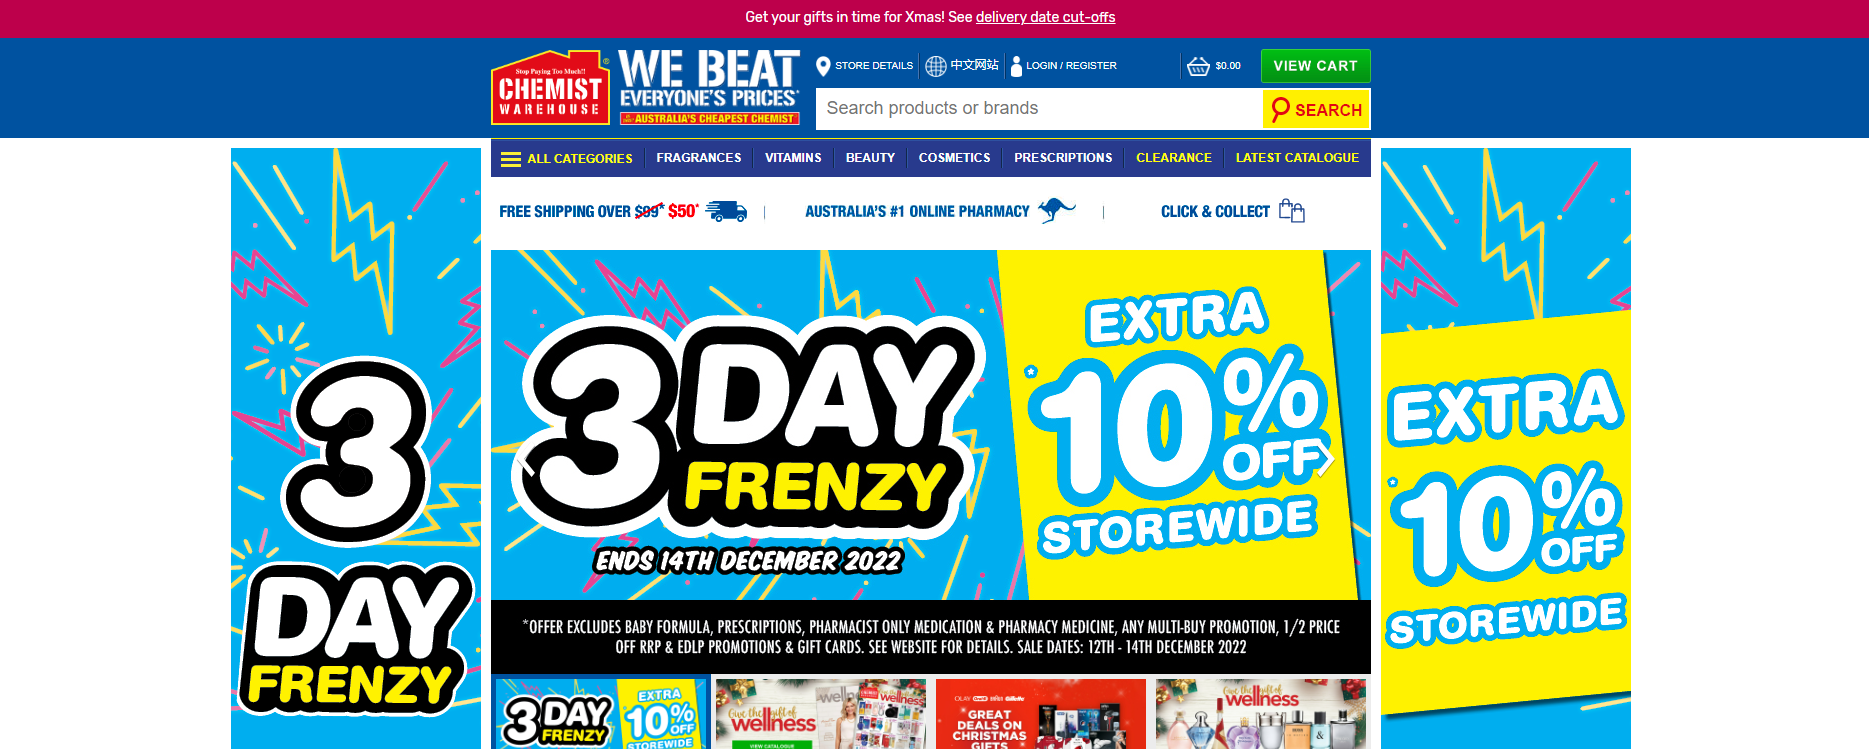 Chemist Warehouse 3-Day Frenzy: Extra 10% OFF storewide, Free shipping $50+